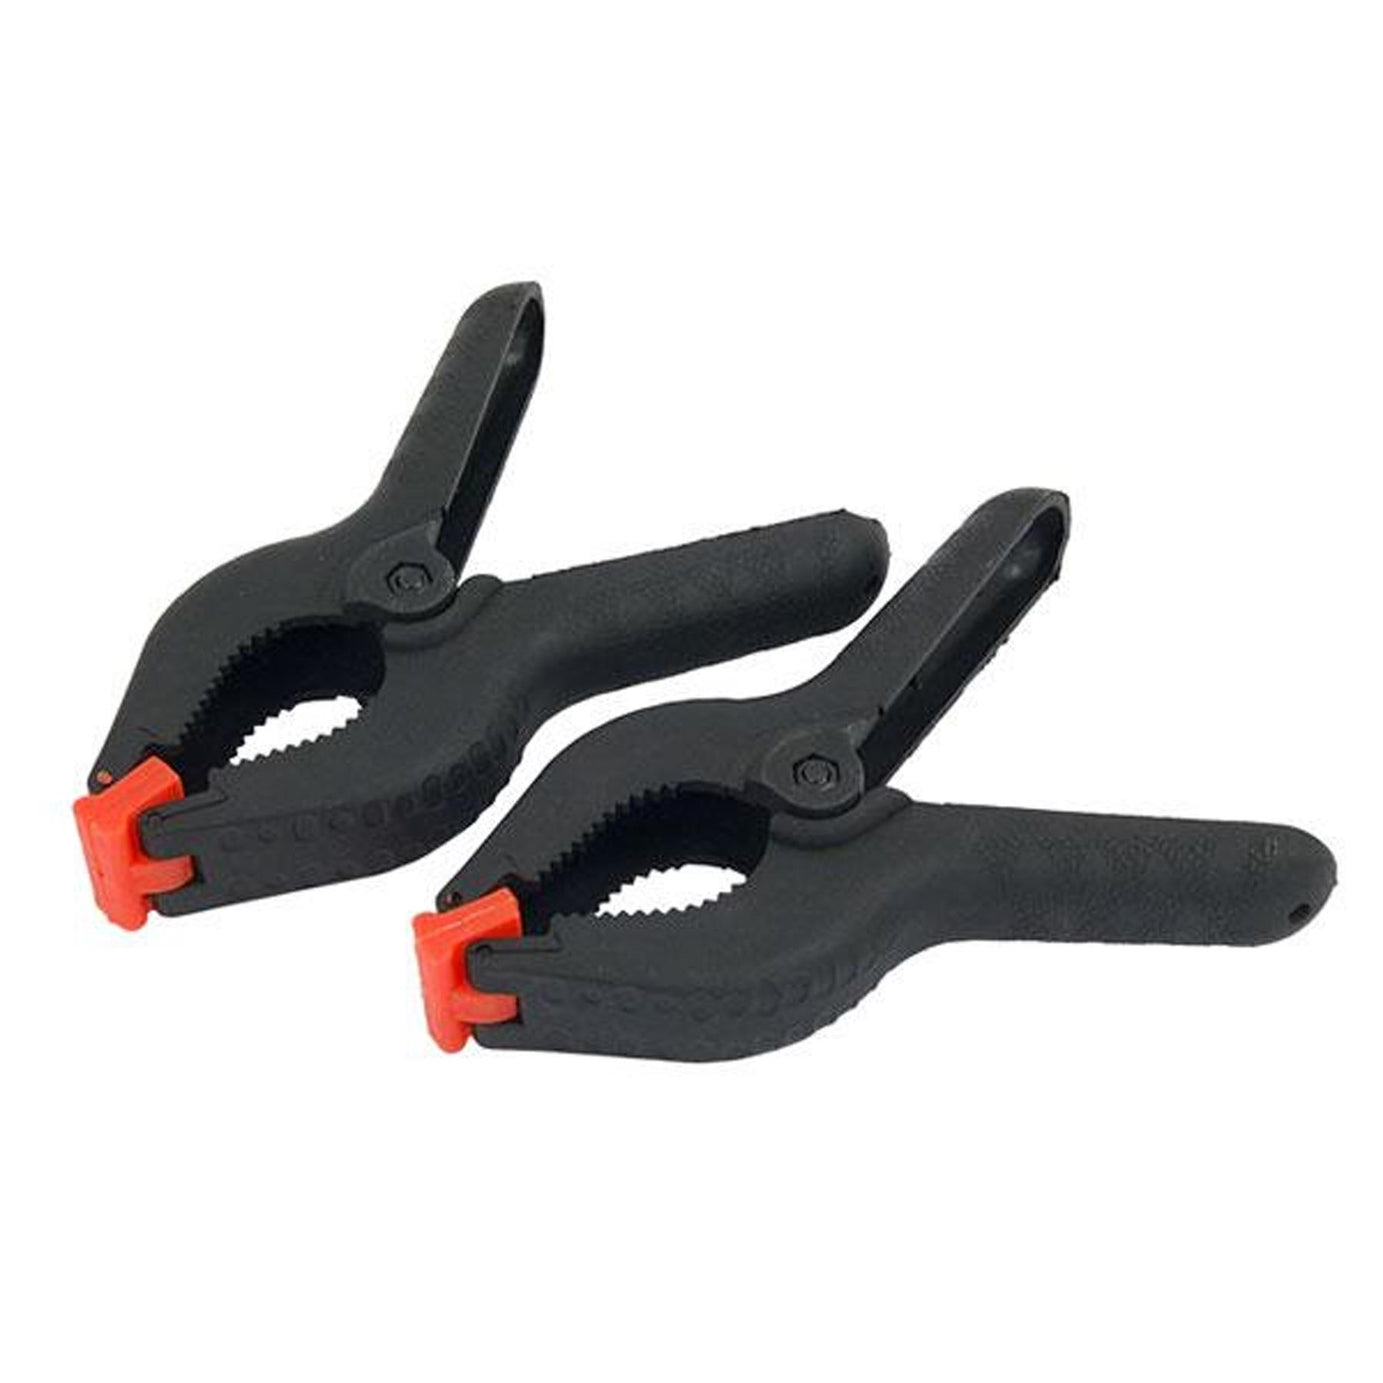 2 x 6" Strong Plastic Spring Clamps Market Stall Clips Nylon Large Tarpaulin